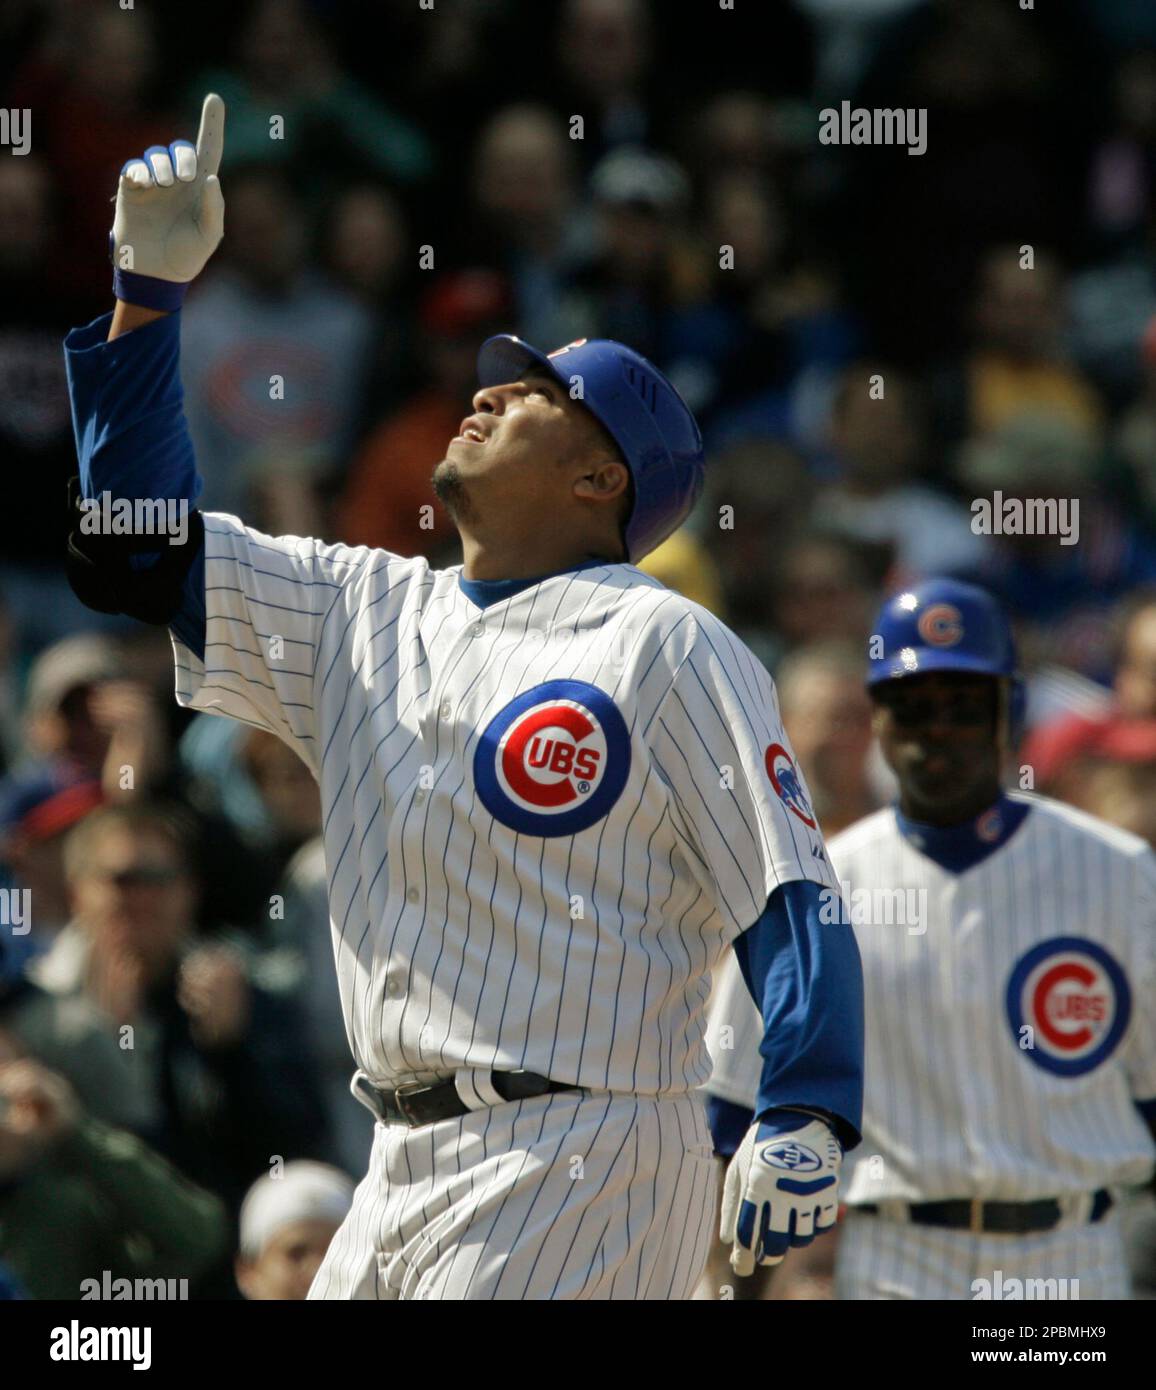 Chicago Cubs' Carlos Zambrano points to the sky as he crosses home plate  after hitting a home run during the fourth inning of a baseball game  against the Cincinnati Reds, Friday, April